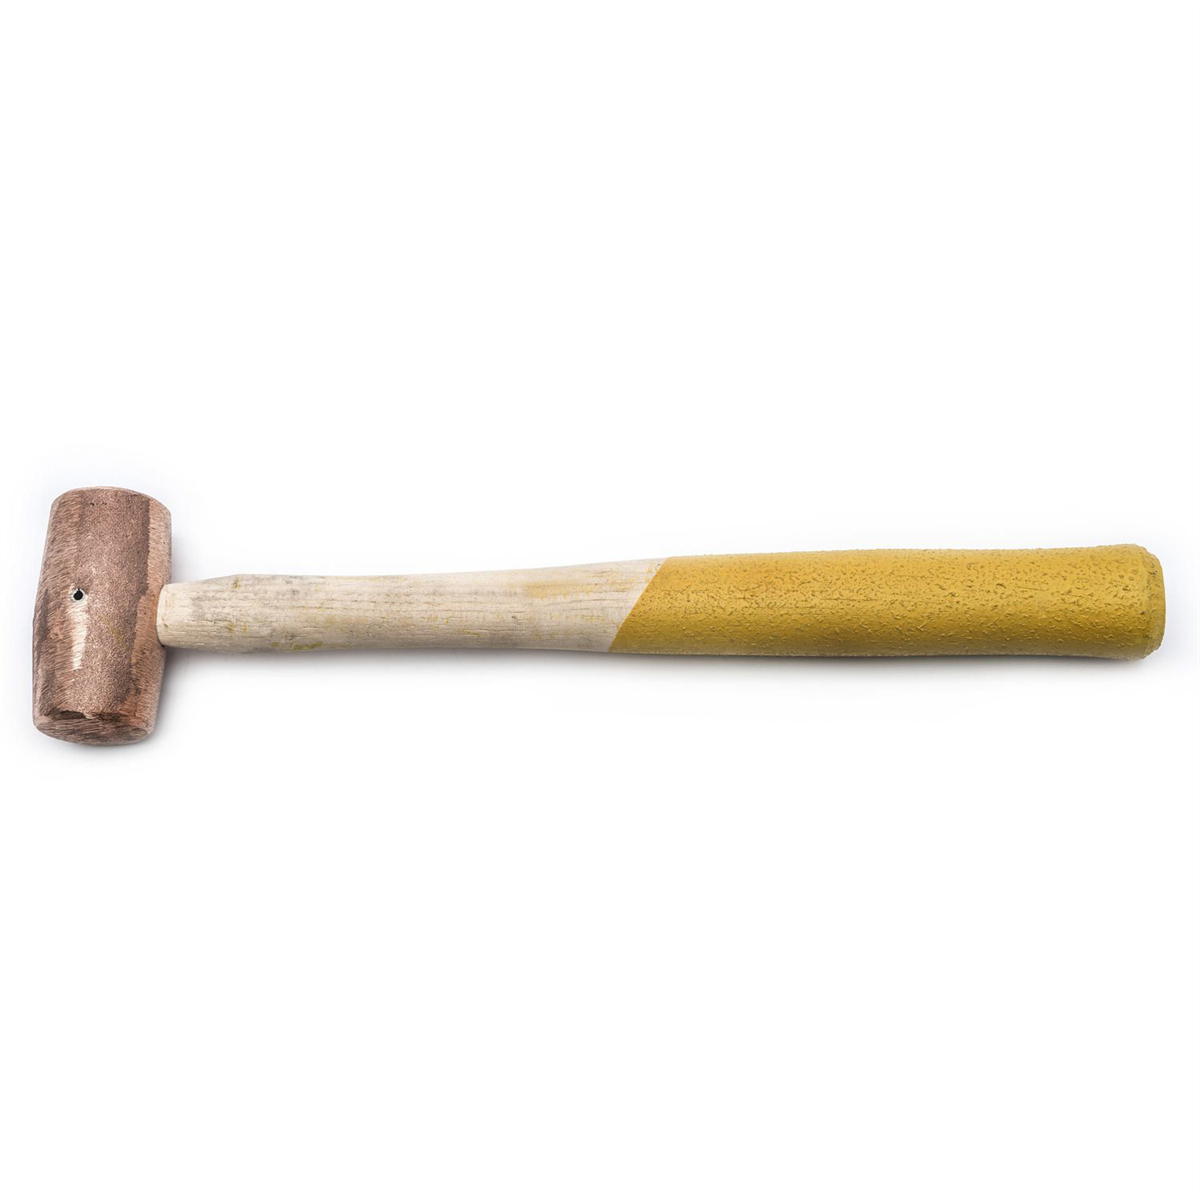 1-1/2 lb Copper Hammer with Hickory Handle